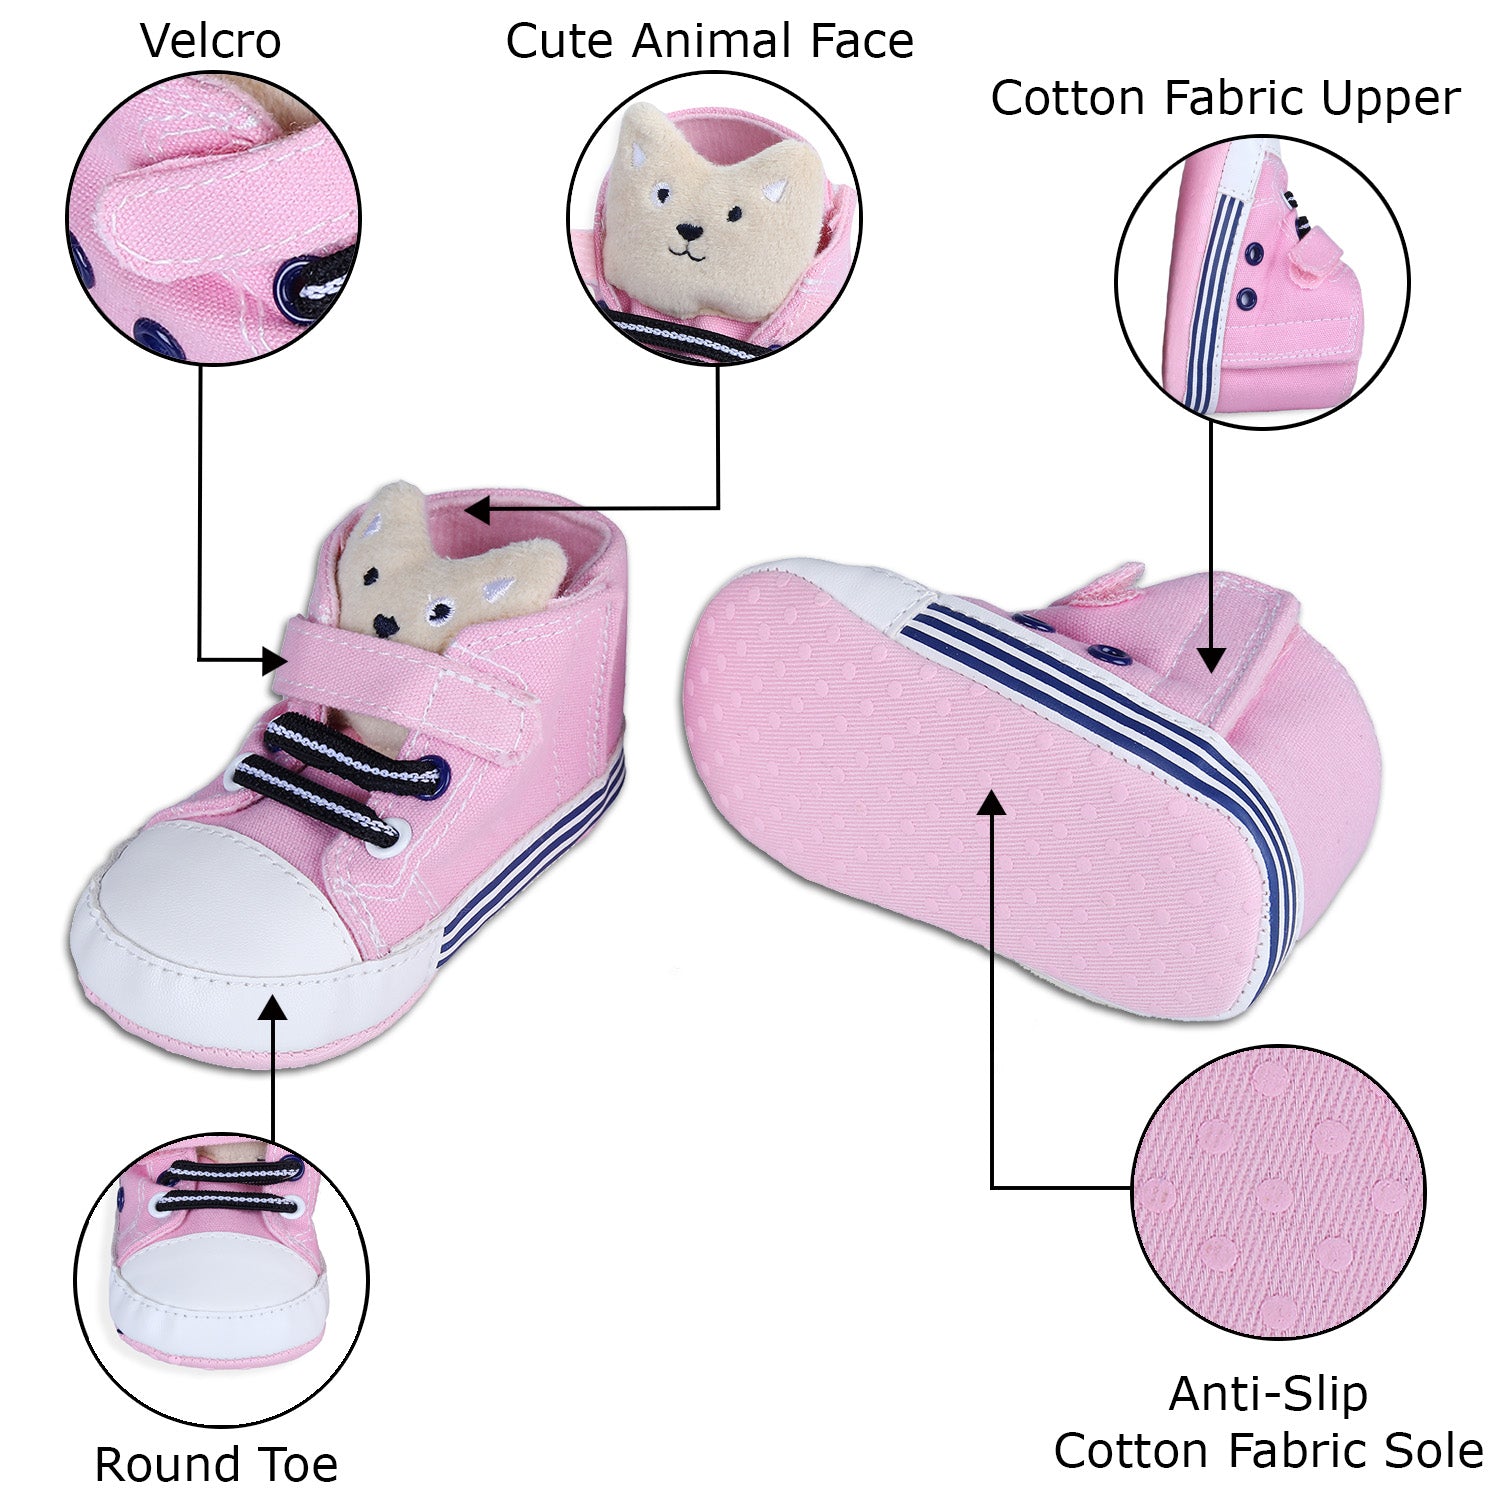 Baby Moo My Buddy Bear Cute And Stylish Comfy Booties - Pink